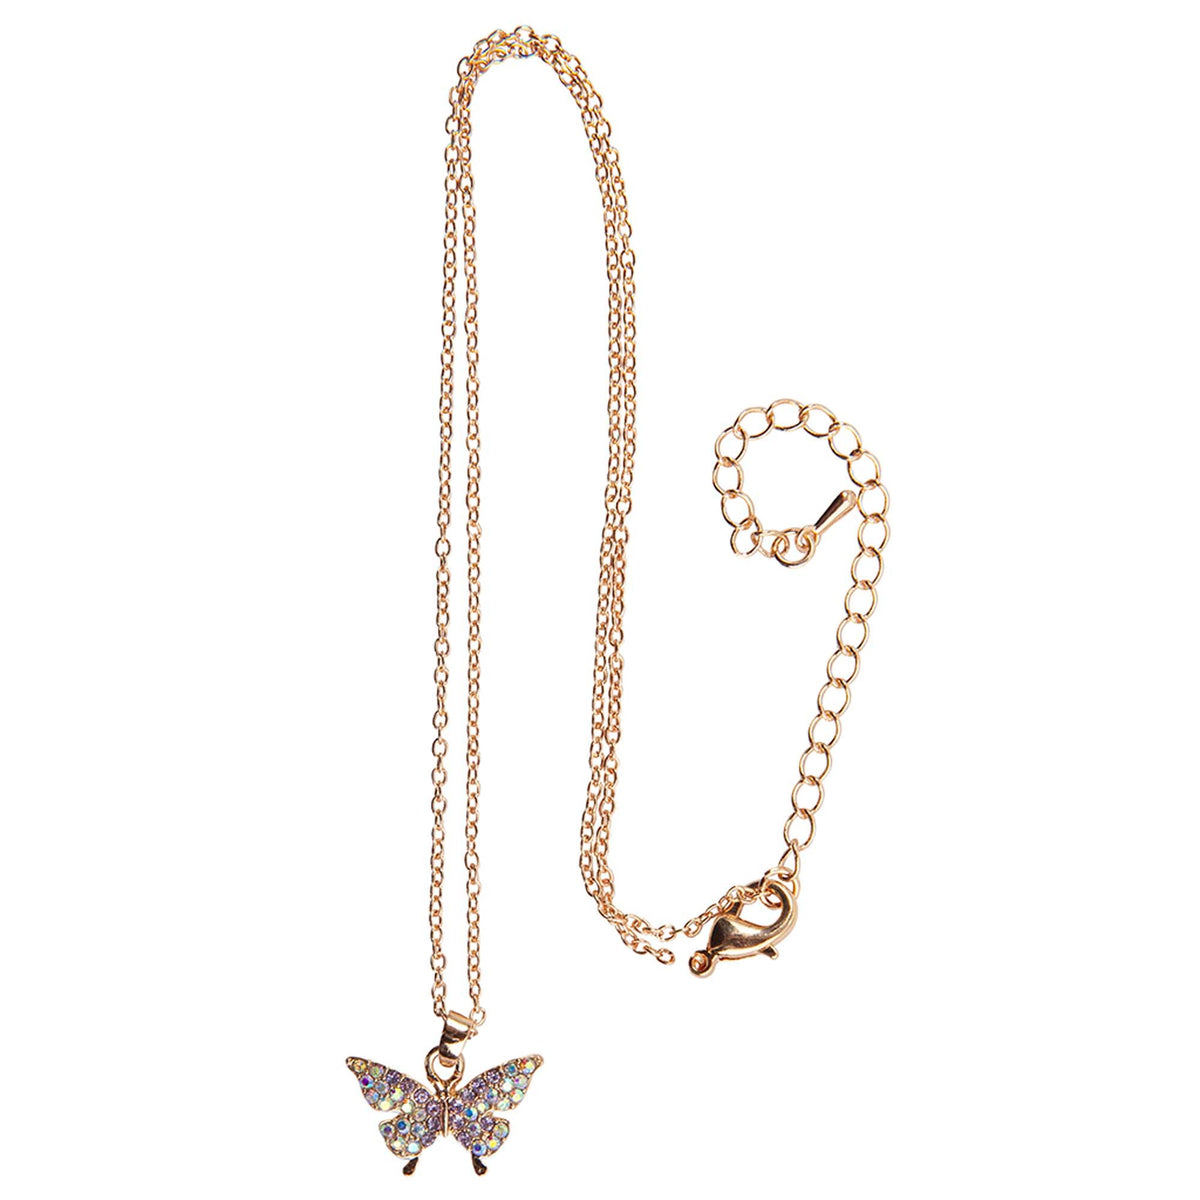 Great Pretenders Impulse Buying Rose Gold Butterfly Necklace, 1 Count